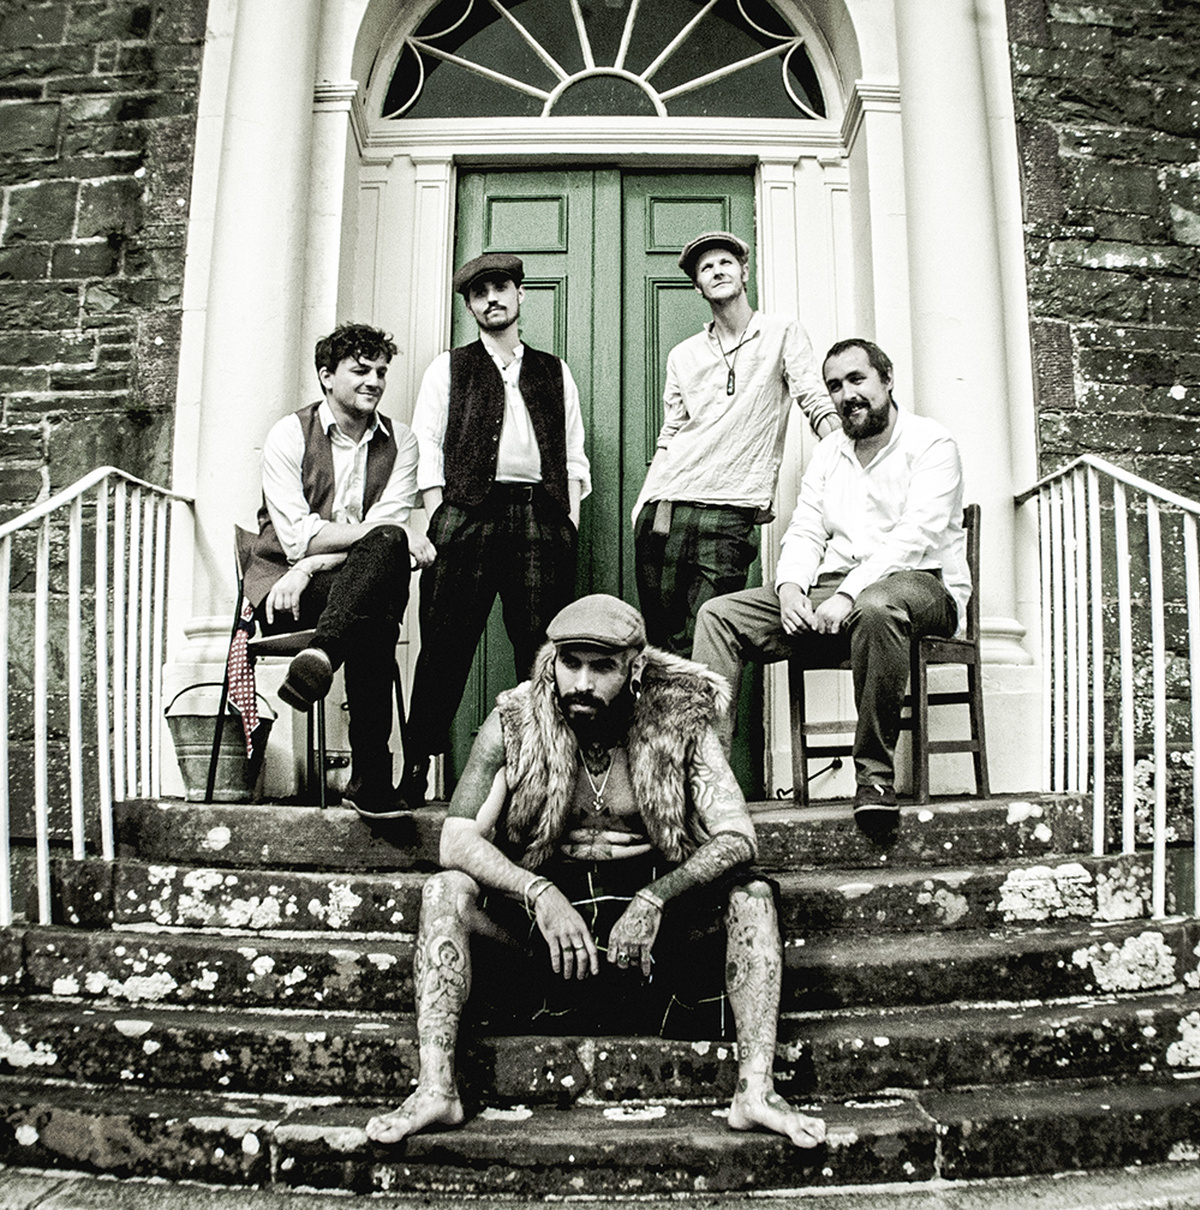 A band photo of An Dannsa Dub, 5 men on the steps of an old brick house all wearing old fashioned garb.